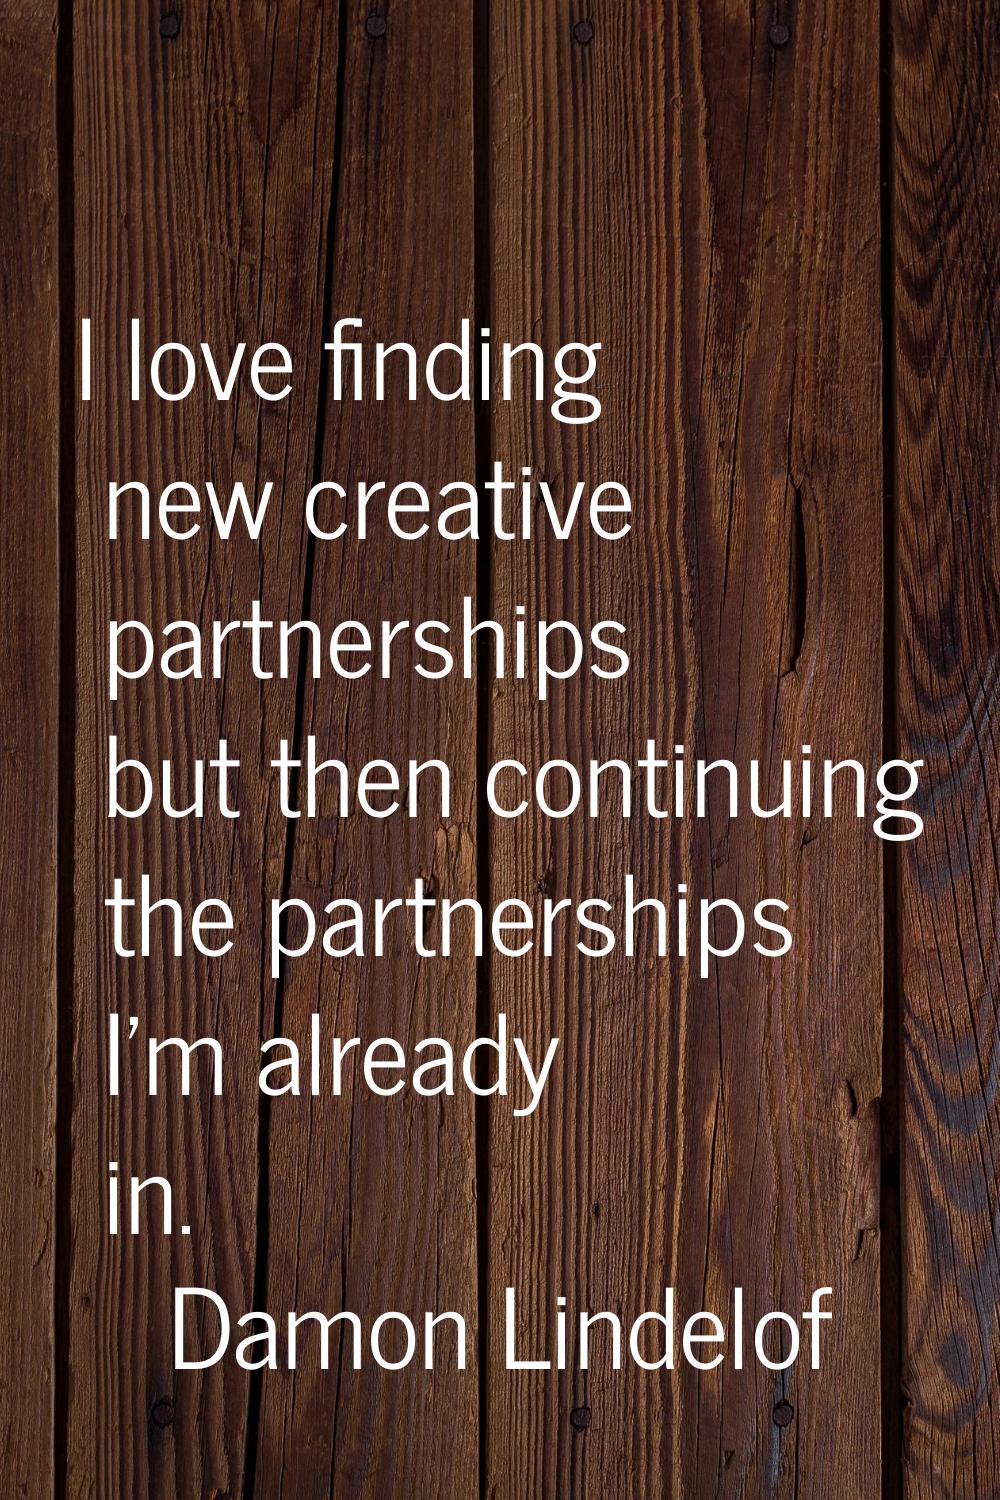 I love finding new creative partnerships but then continuing the partnerships I'm already in.